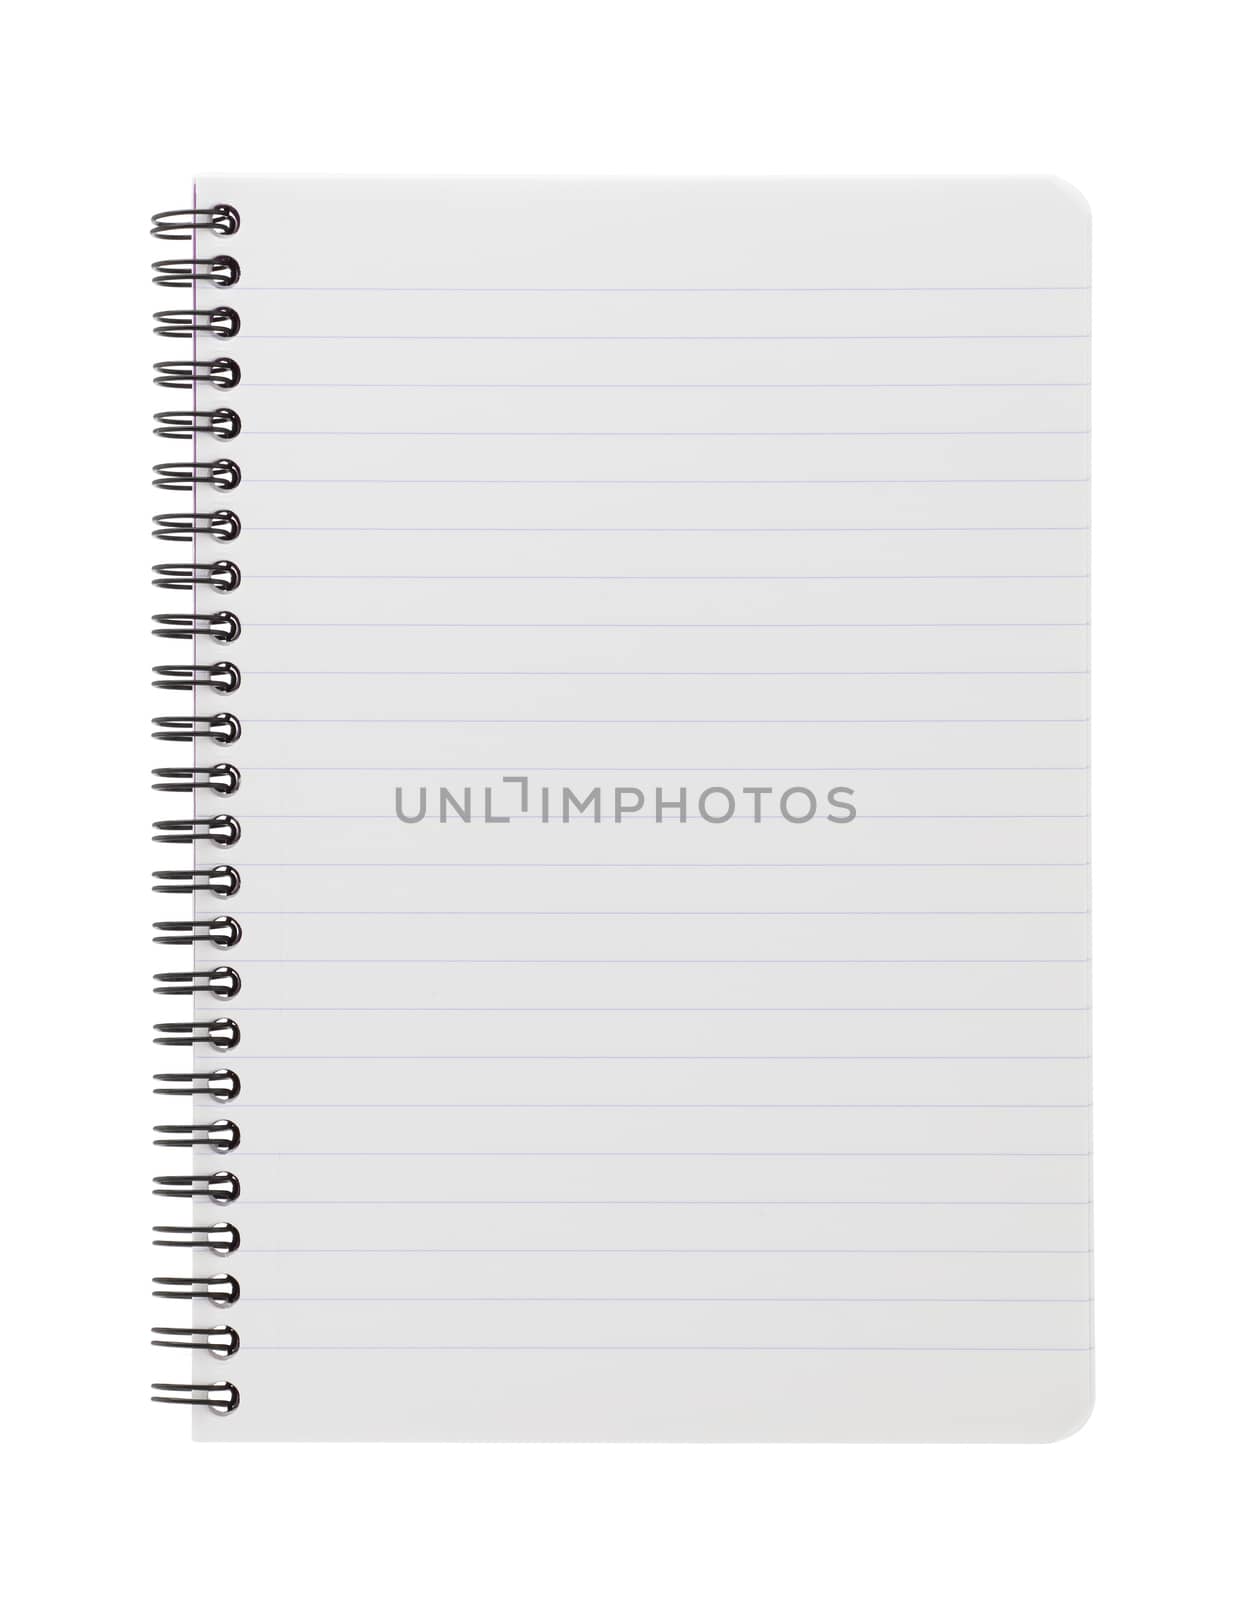 A lined paper notebook isolated on white background